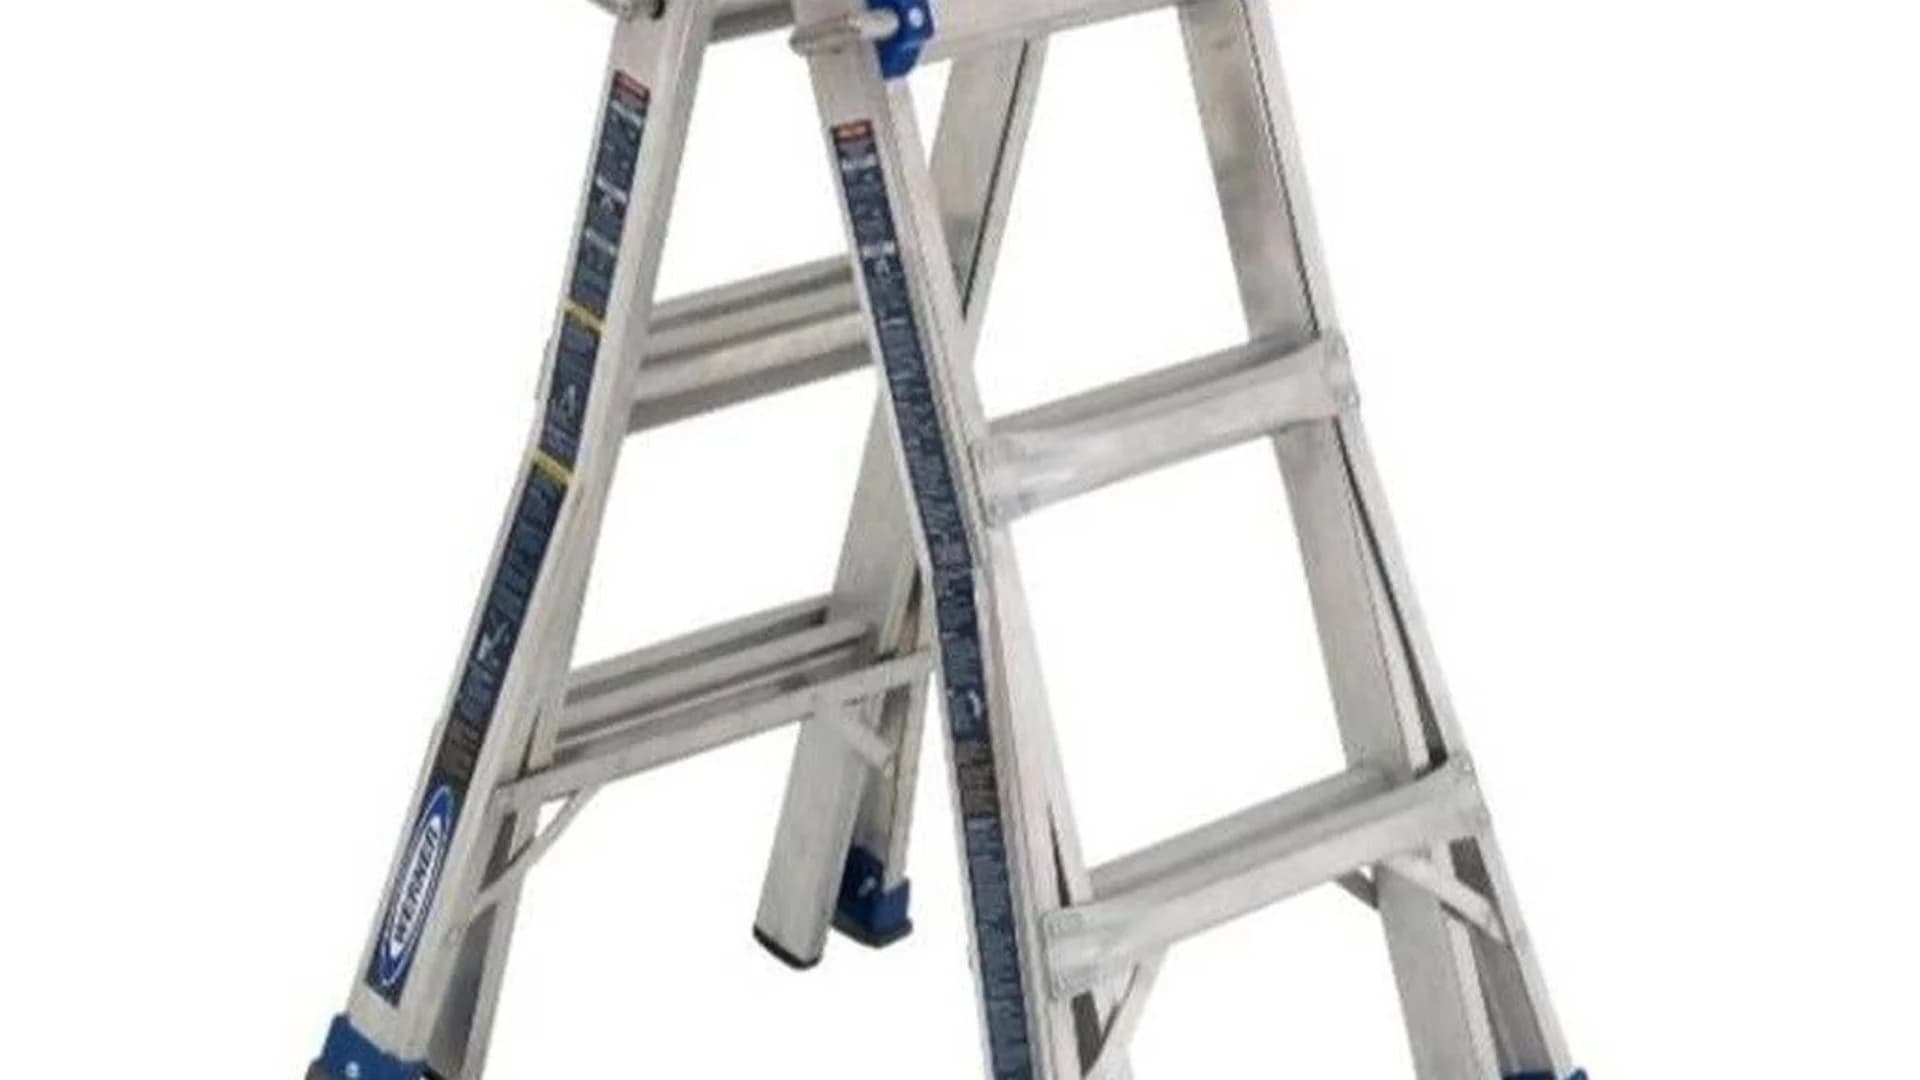 Certain aluminum ladders sold at Home Depot, Lowe’s recalled